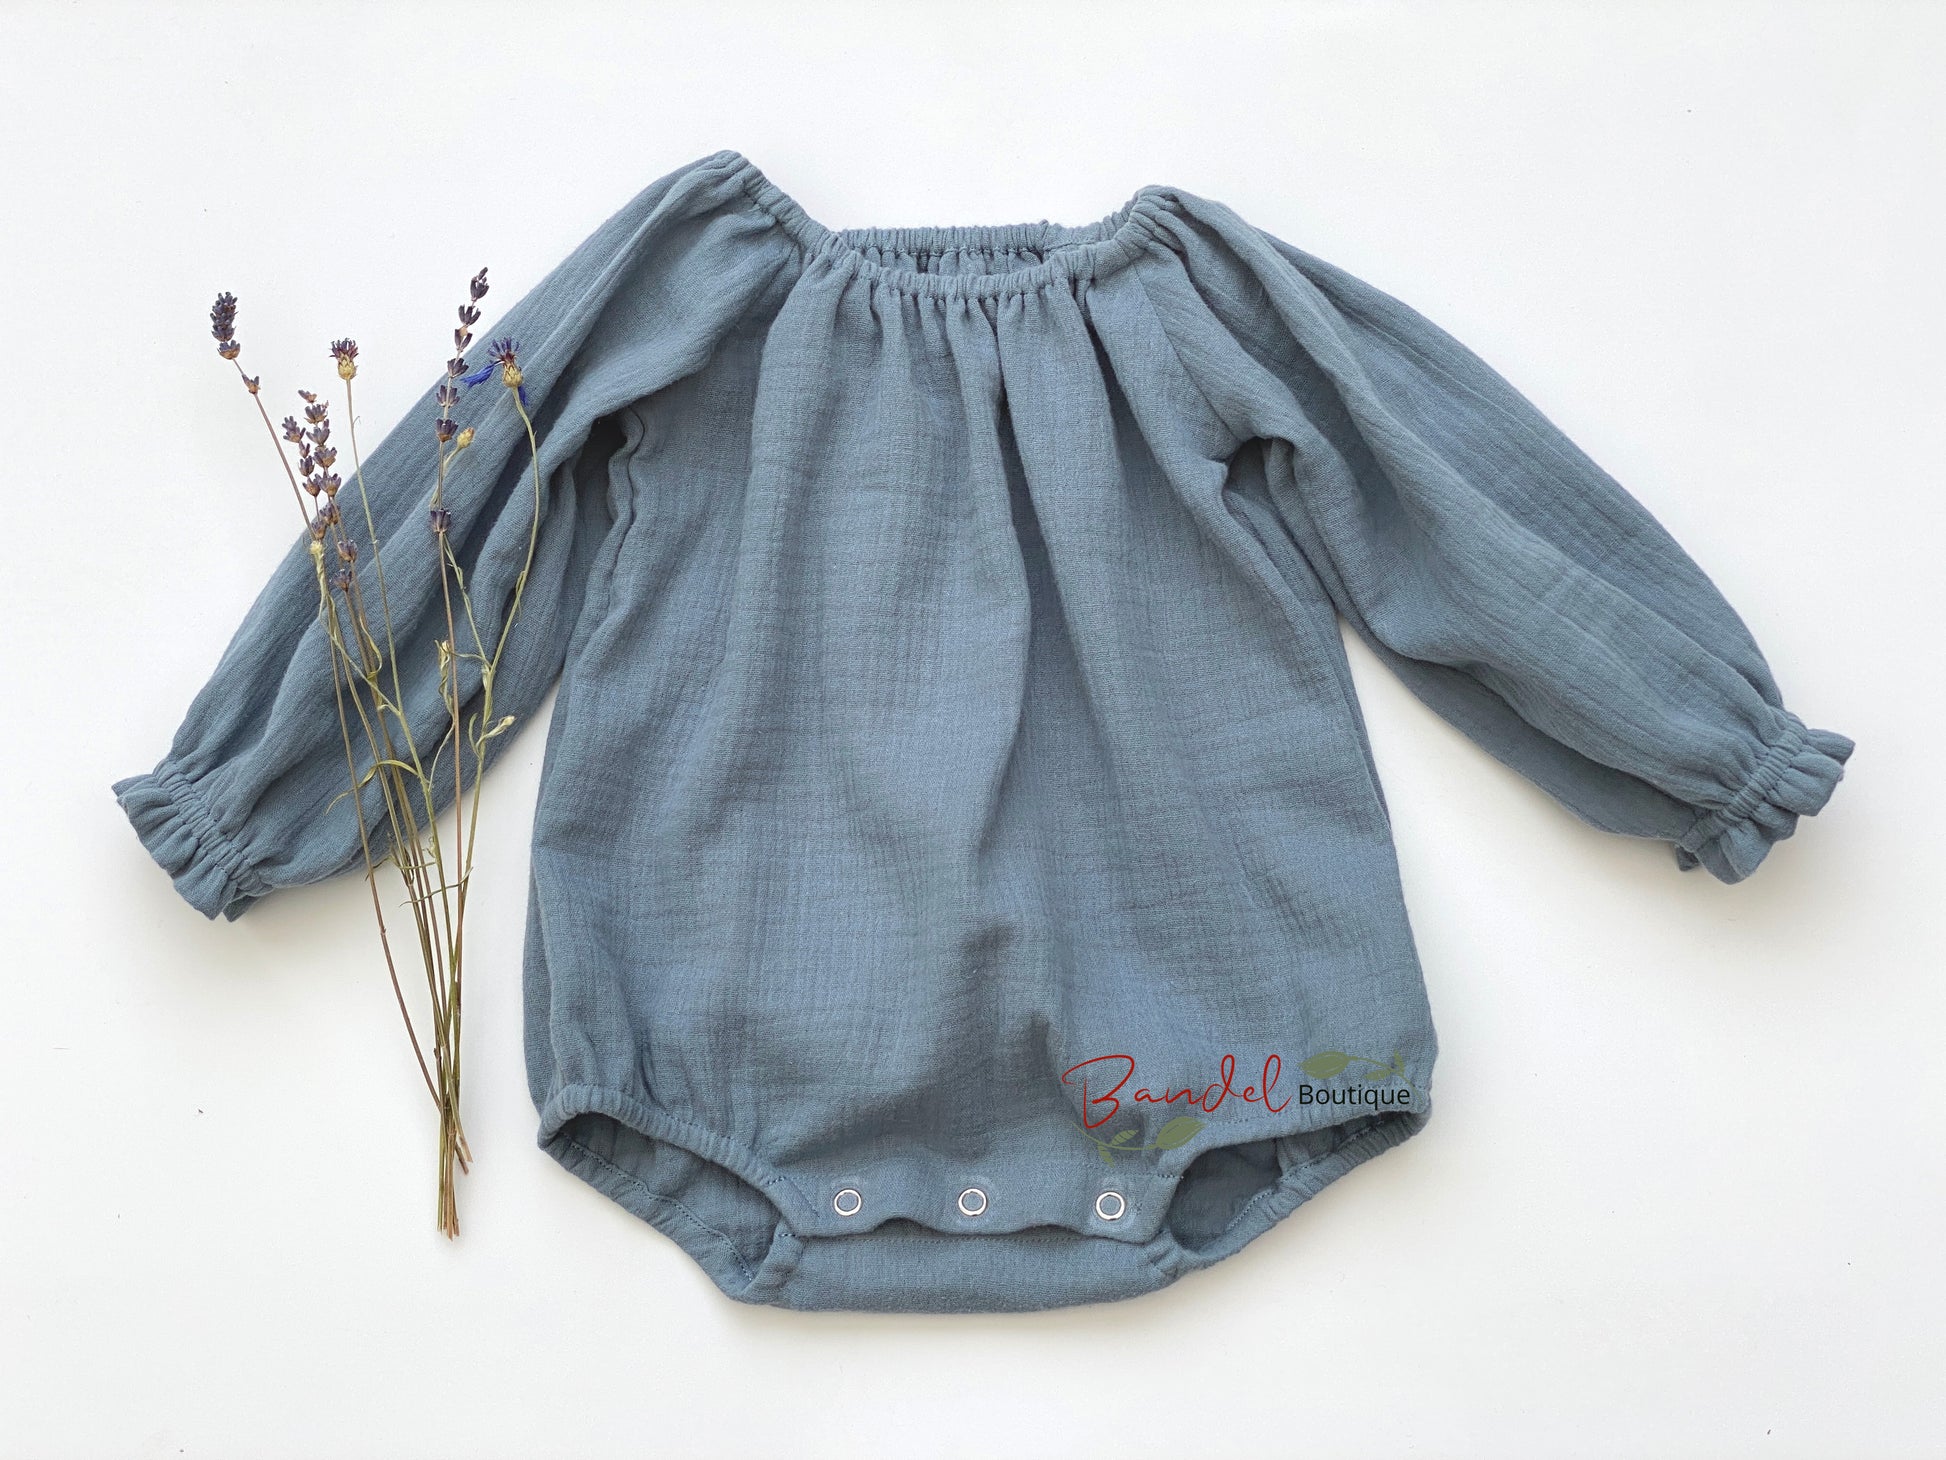 Handmade dusty- blue minimalist newborn baby romper with long sleeves, made from breathable and soft double gauze organic fabric. Features elasticized openings and crotch snaps for easy dressing and maximum comfort. 